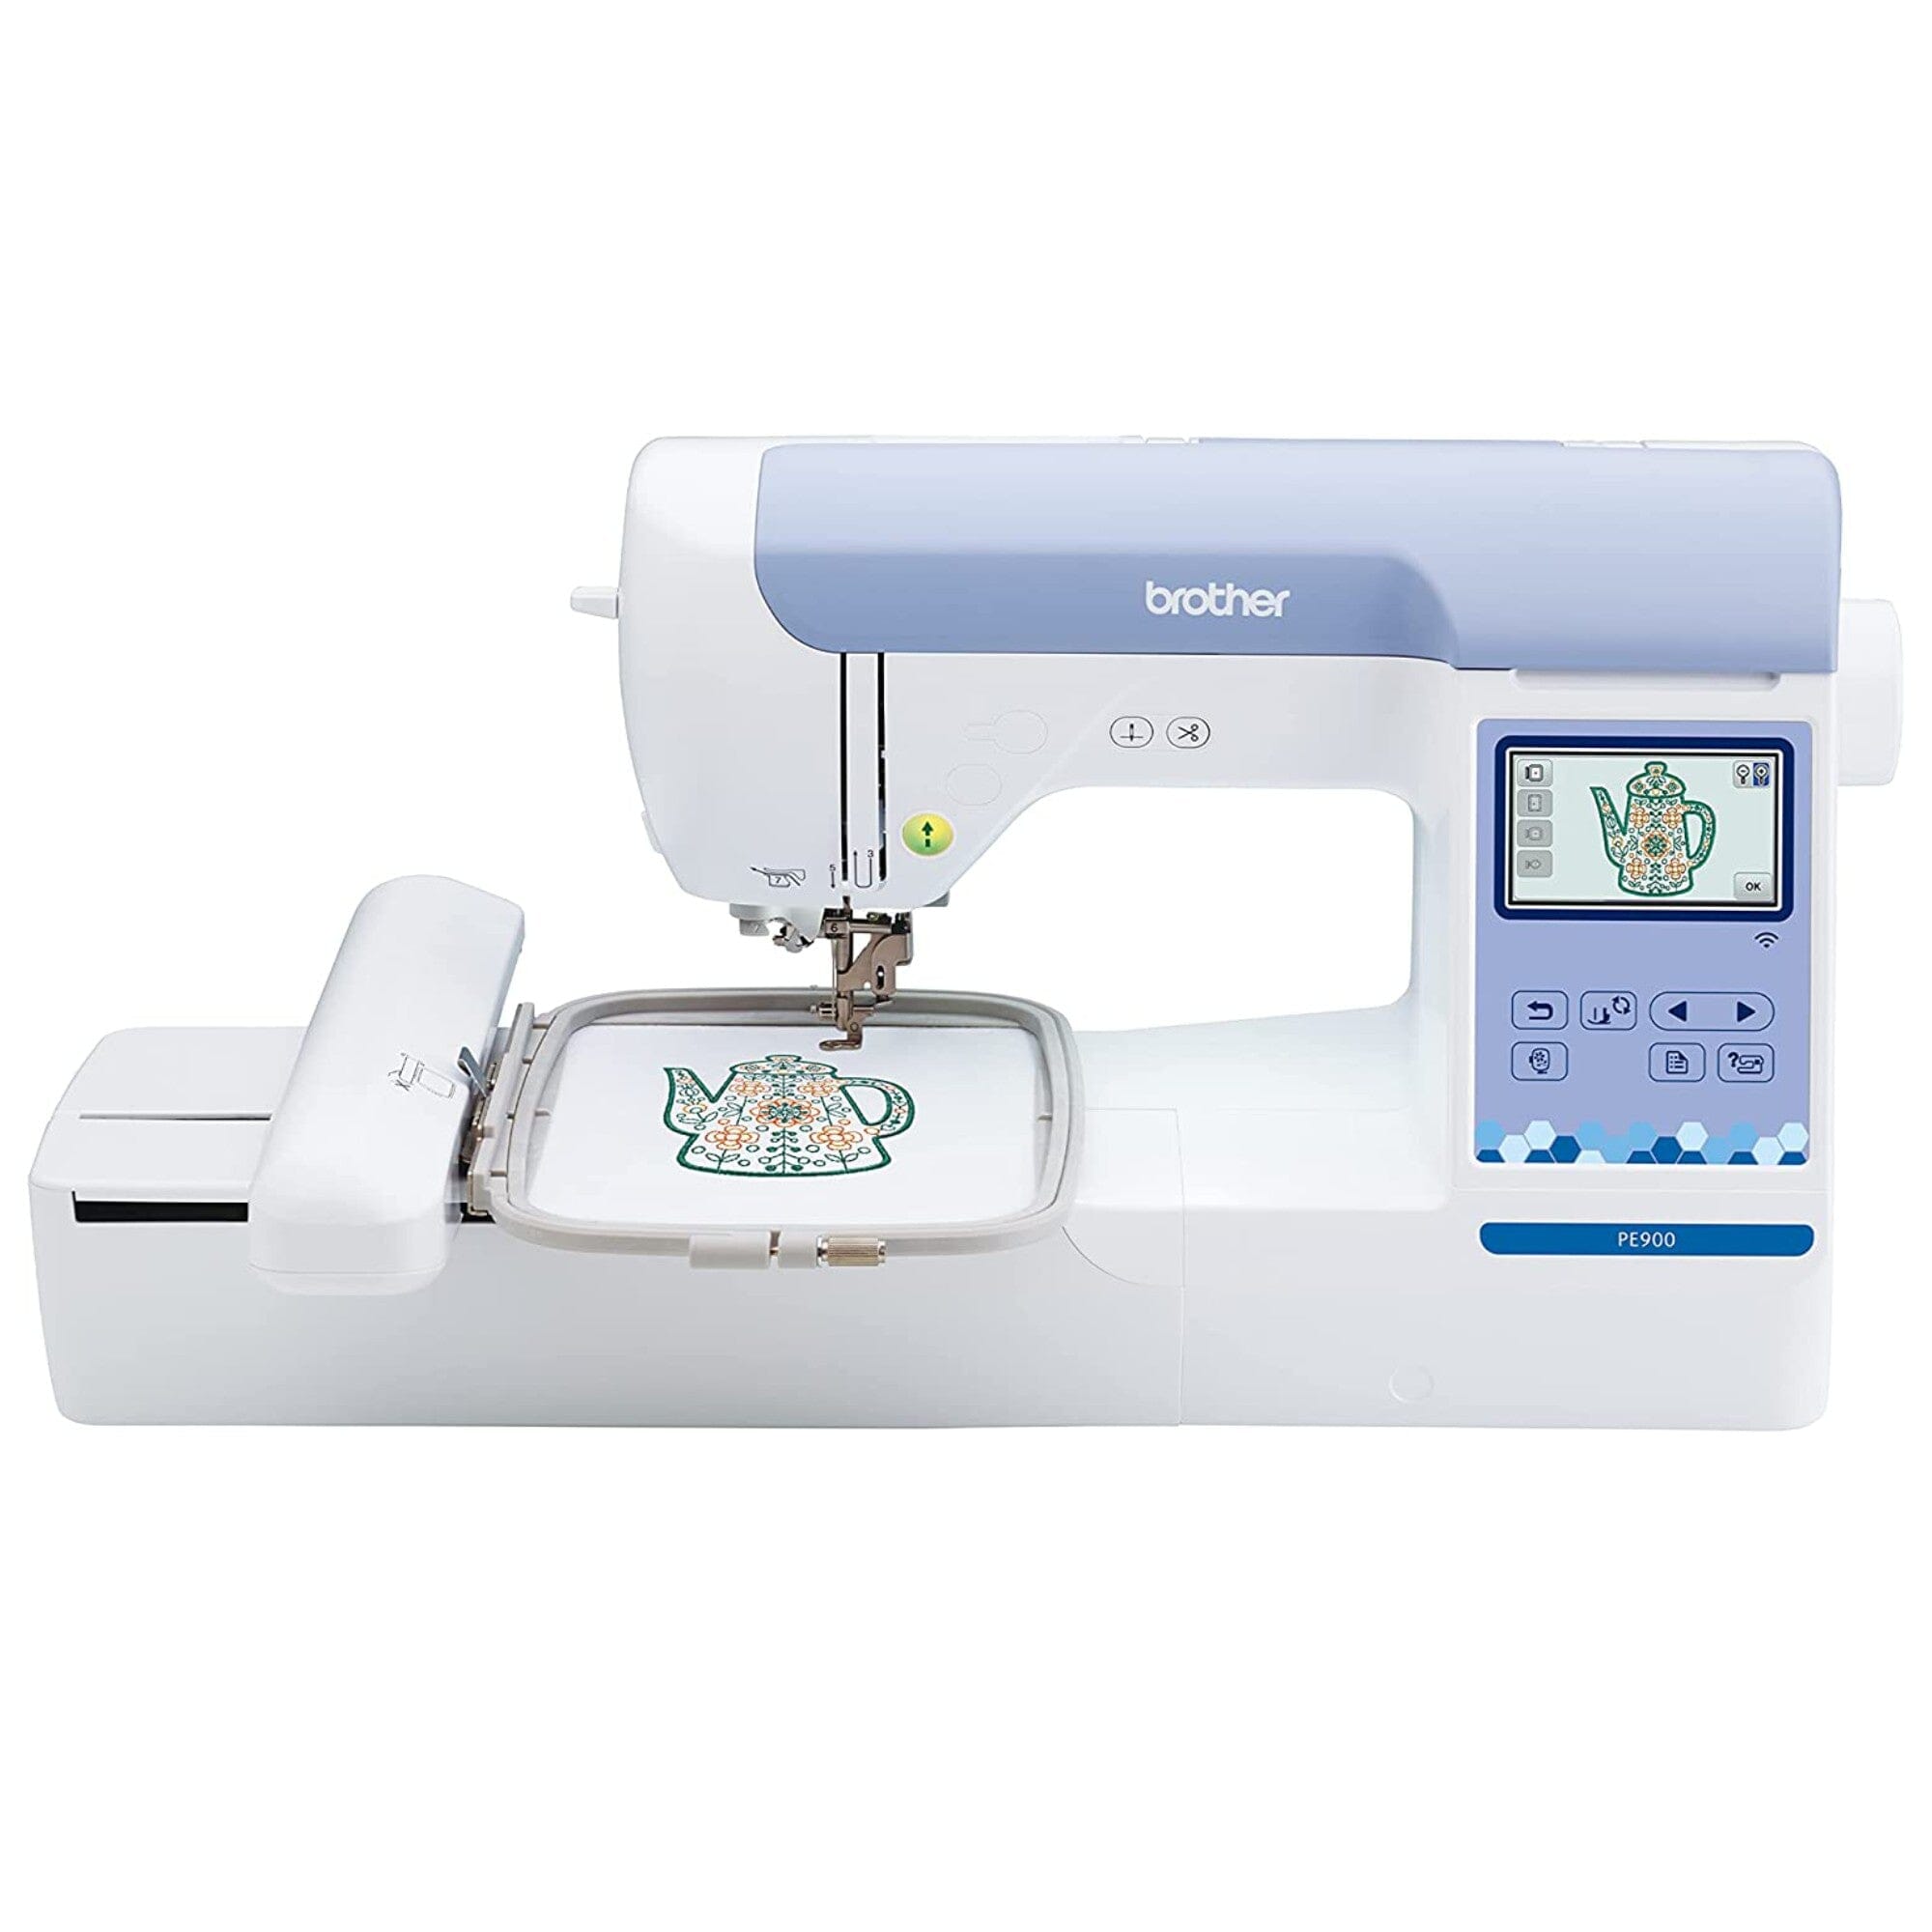 Embroidery Machine Reviews - The Social Stitchery